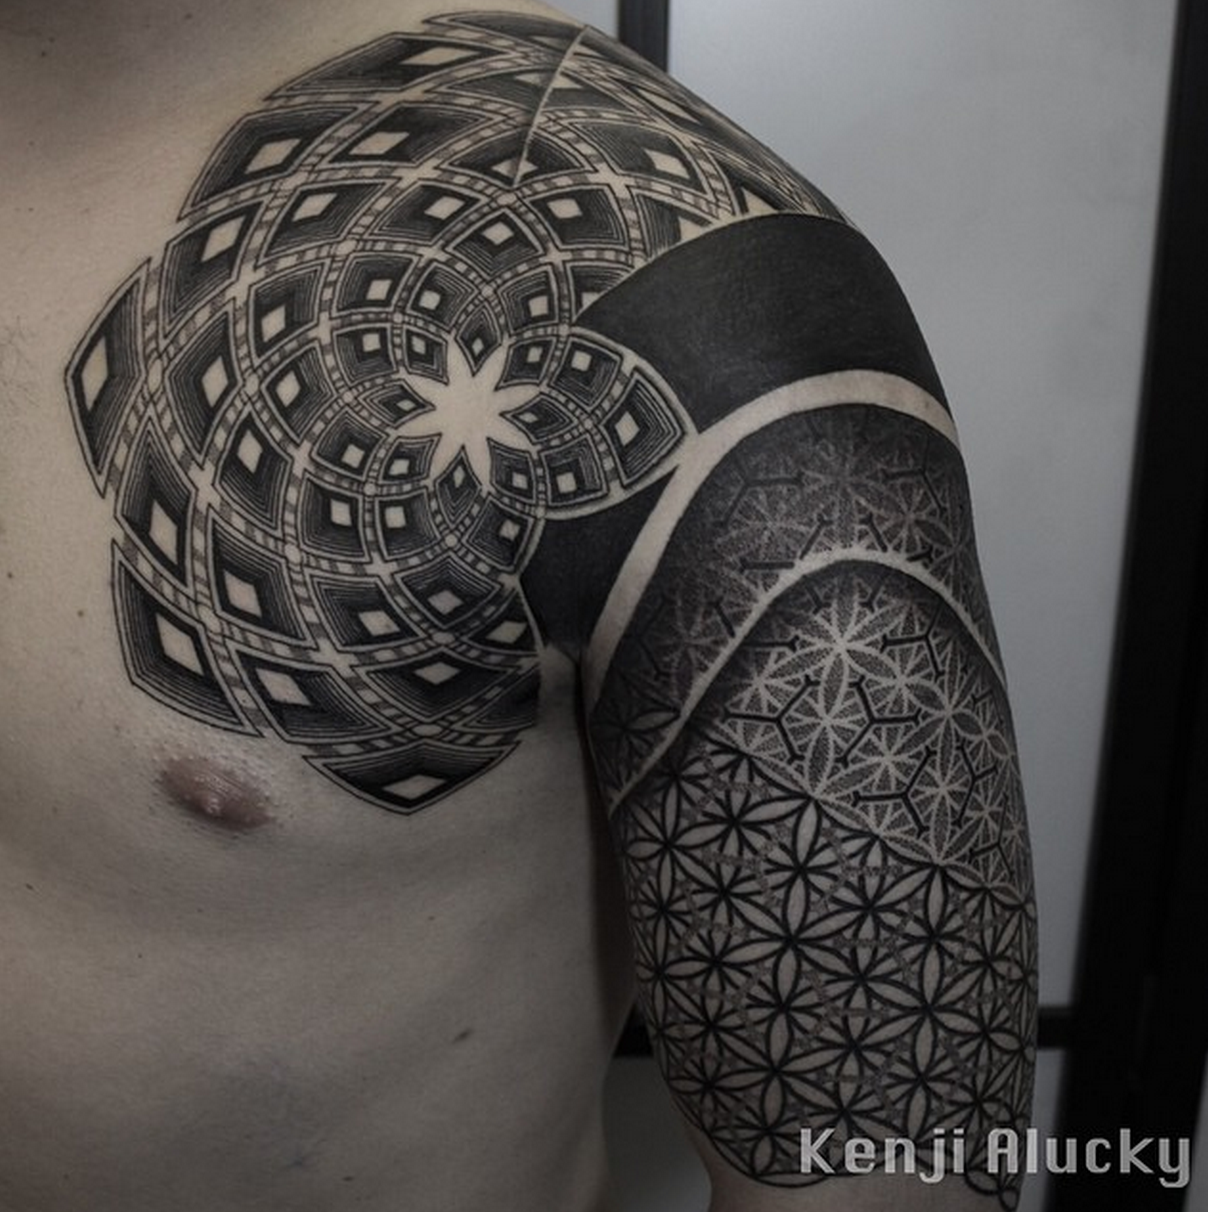 The flower  of life  Sacred Geometry Tattoo  on Shoulder 